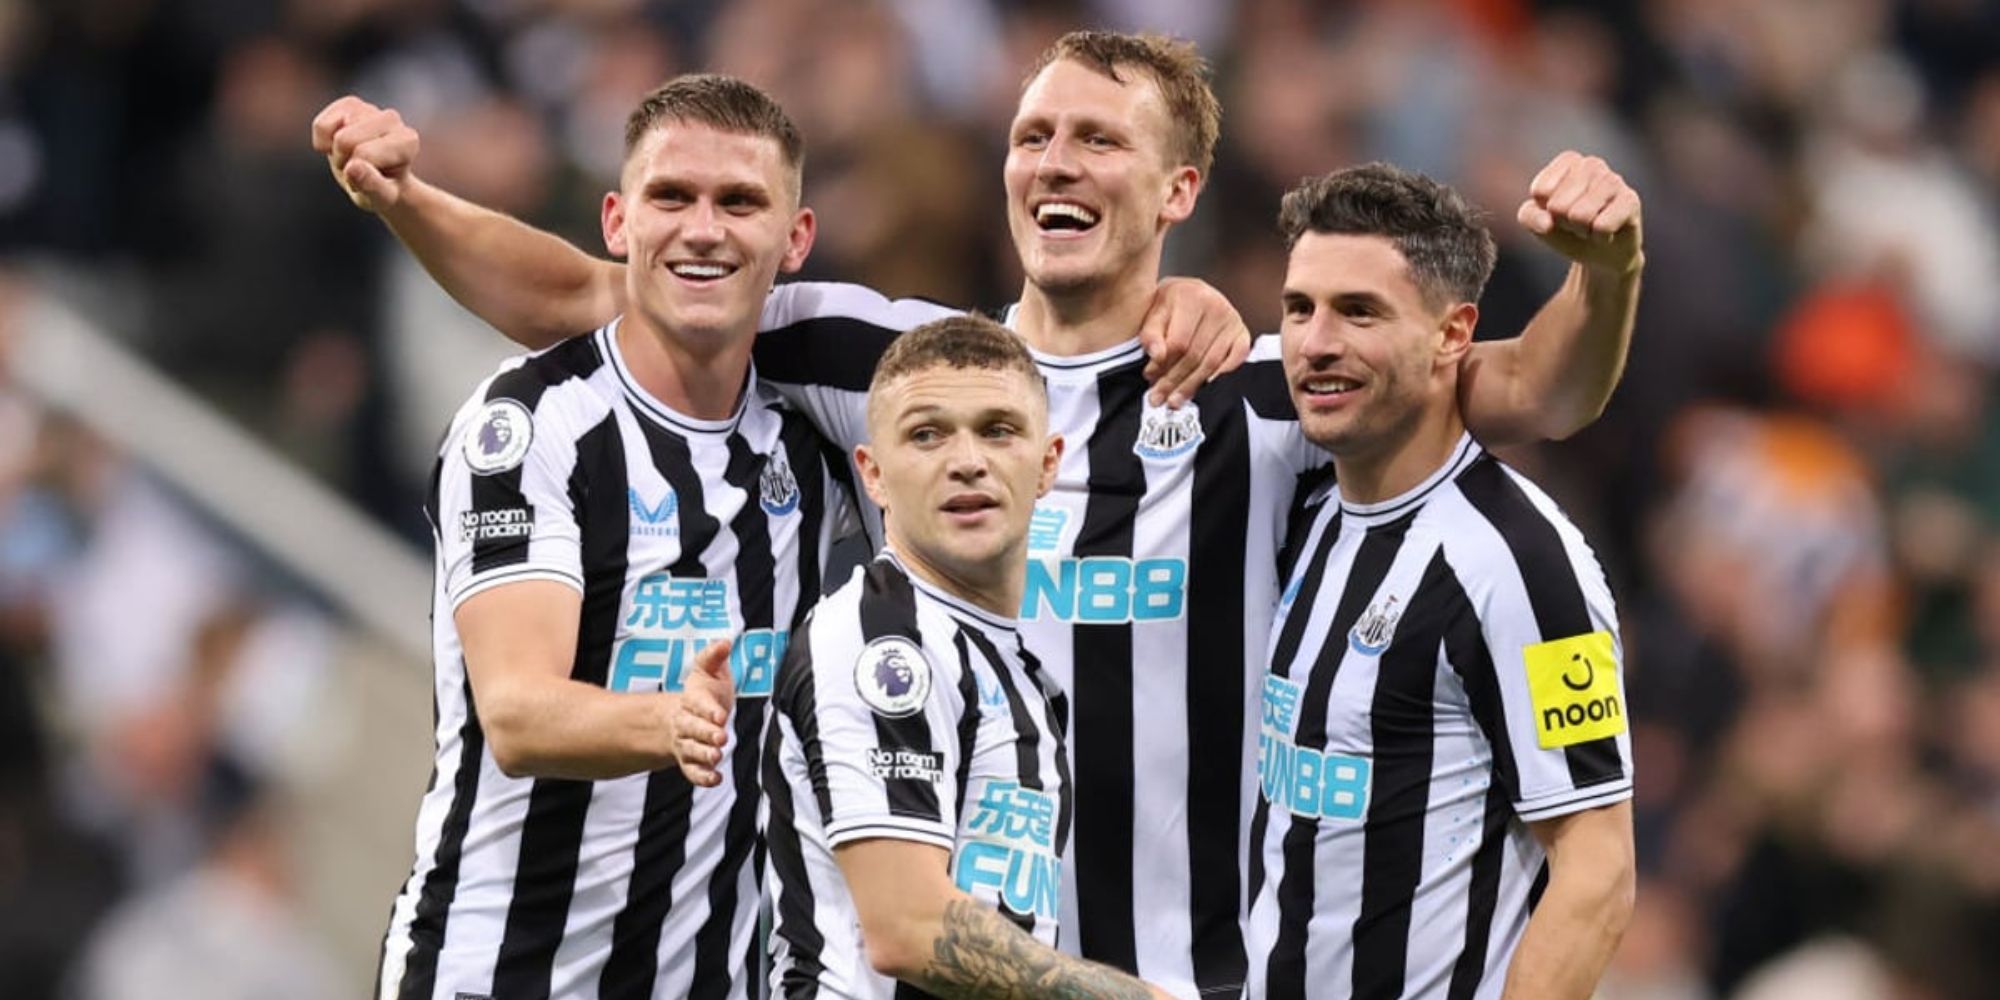 Newcastle United are on the rise in the Premier League